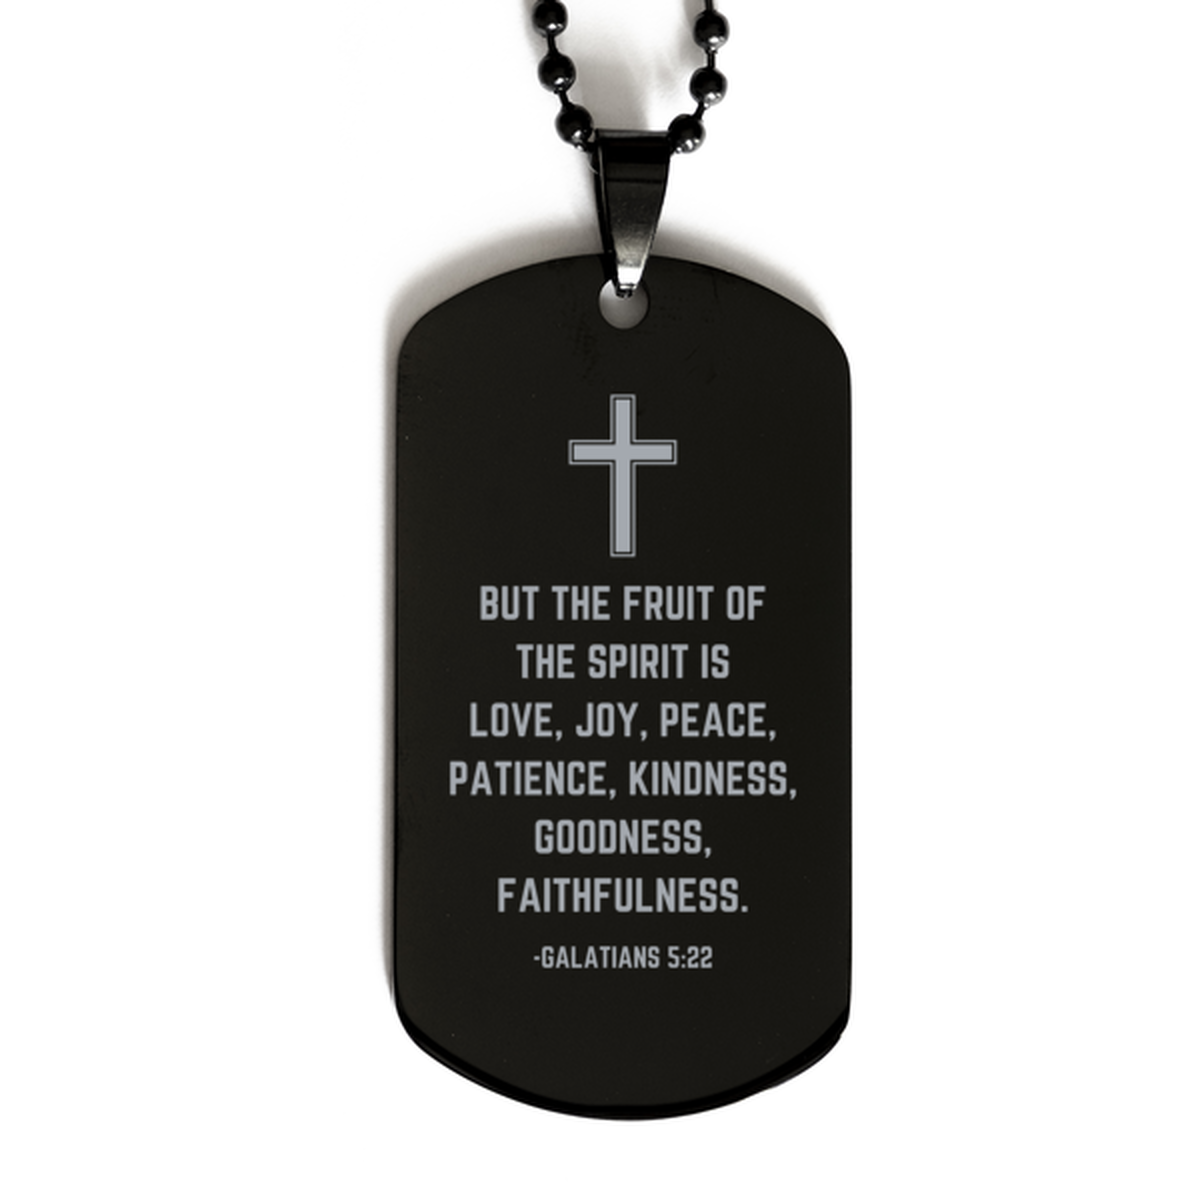 Baptism Gifts For Teenage Boys Girls, Christian Bible Verse Black Dog Tag, But the fruit of the Spirit, Confirmation Gifts, Bible Verse Necklace for Son, Godson, Grandson, Nephew